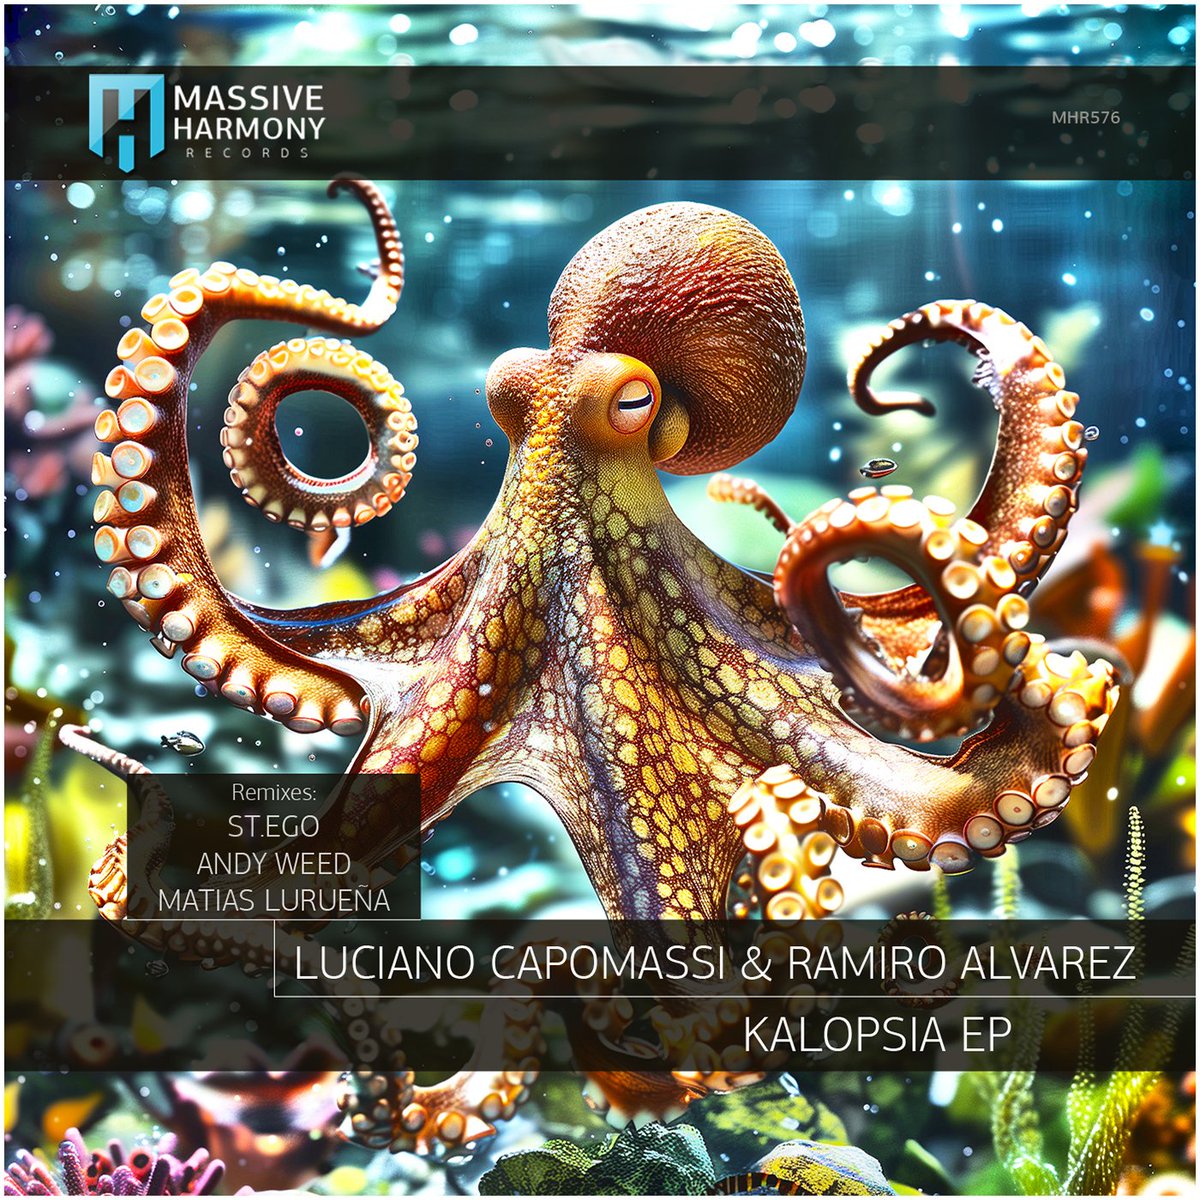 Still fresh! A few days ago, we released this great EP! Stream or purchase here: go.protonrad.io/rl3QvT5OlZsRY

#progressivehouse #organichouse #electronica #electronicmusic #beatport #octopus #ArtificialIntelligence #artwork #Spotify #newsong #music #musica #sea #ableton #DJ #groove